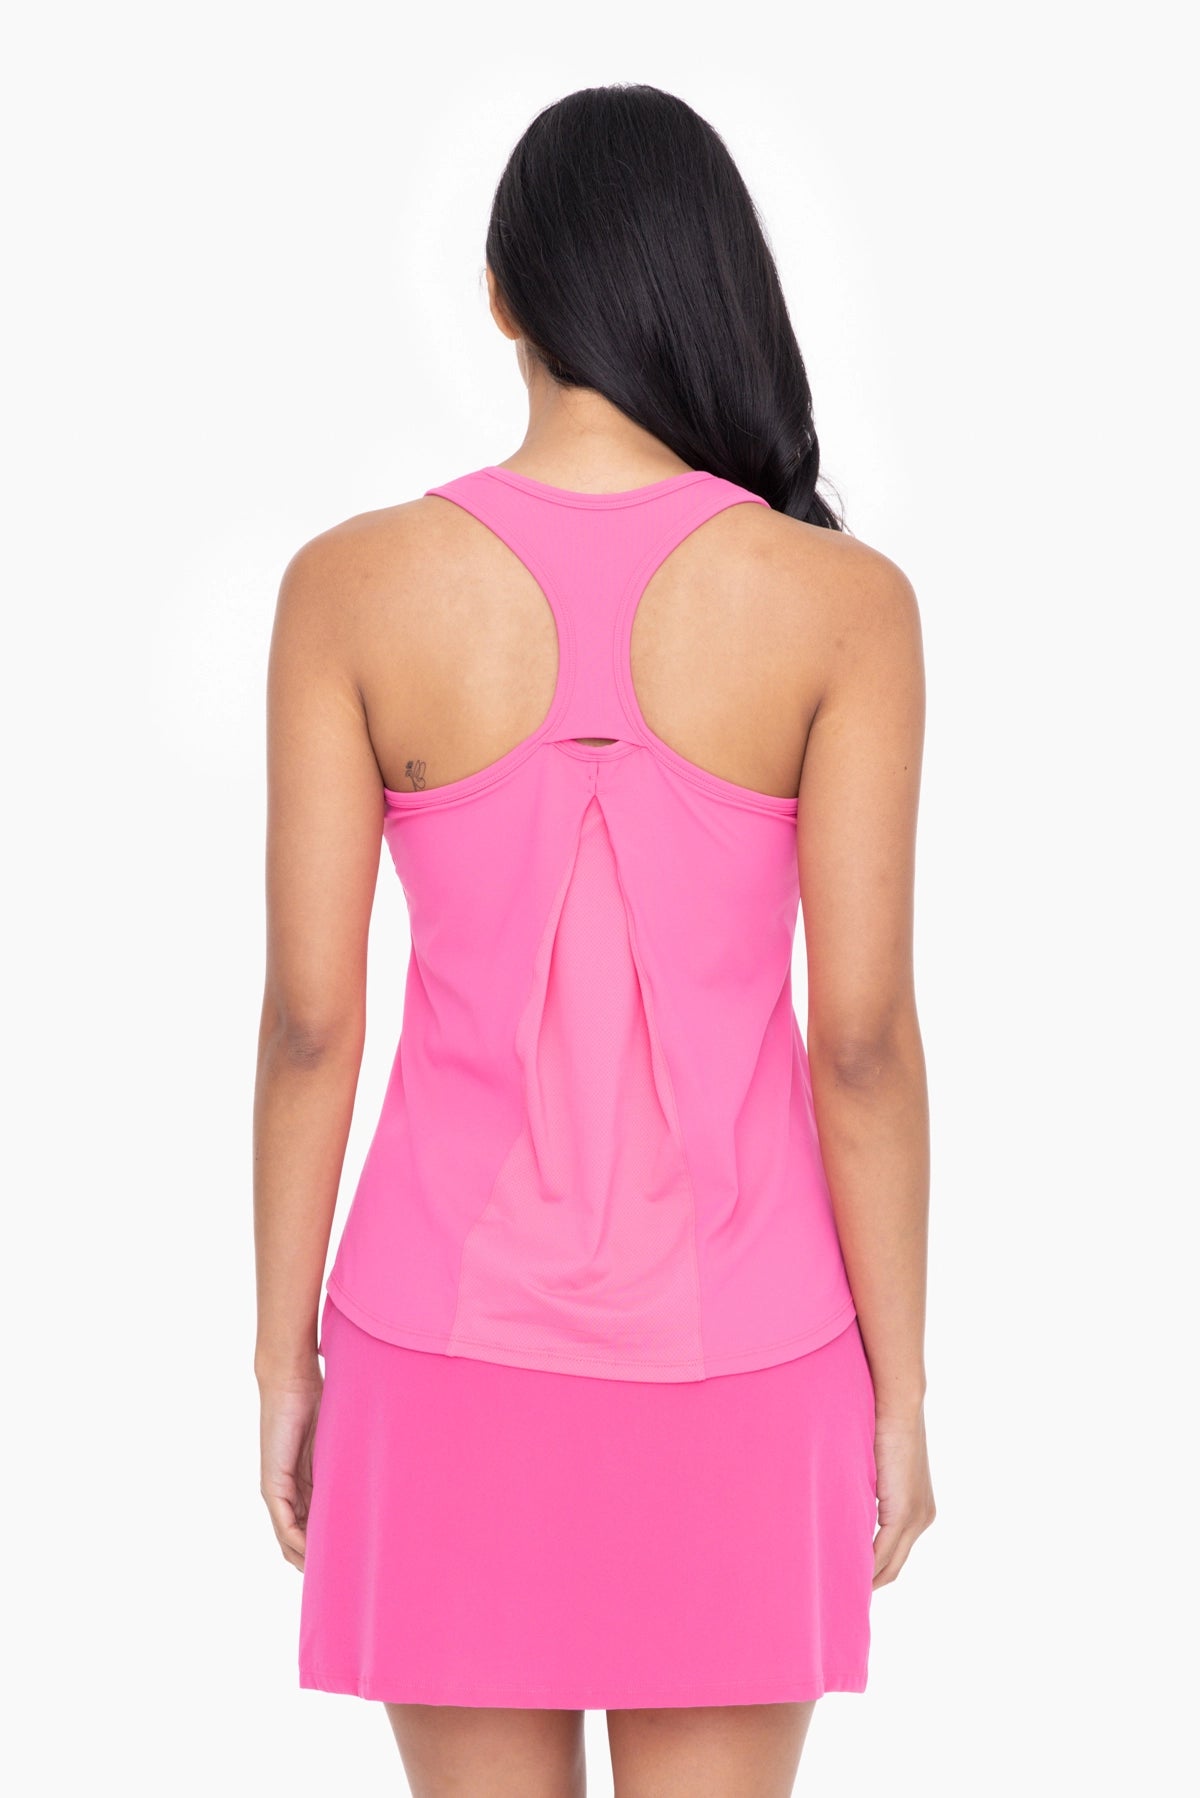 Hot Pink Racerback Active Tank Top - The Street Boutique 